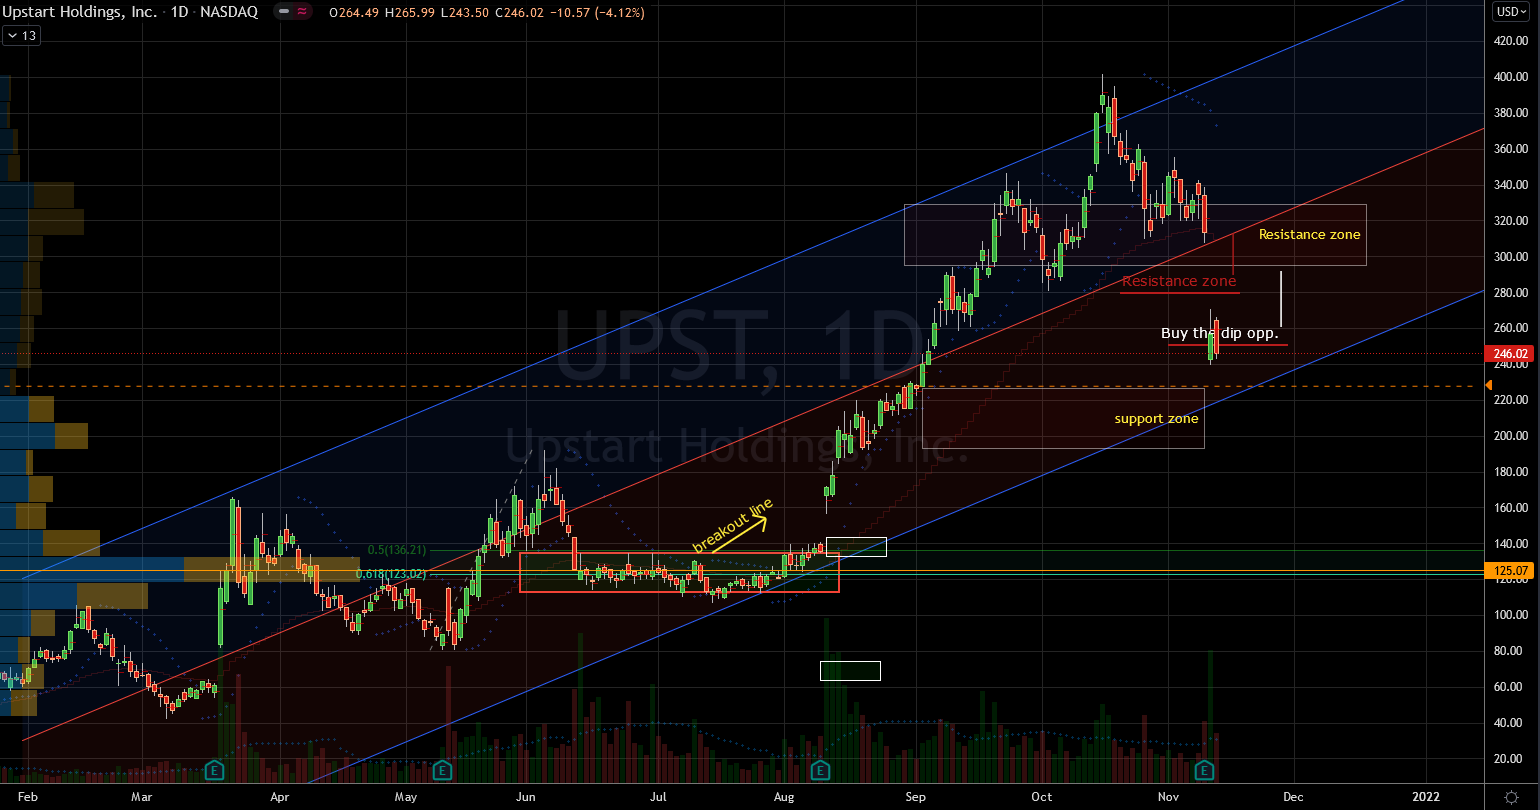 Upstart (UPST) Stock Chart Showing Levels for Entries